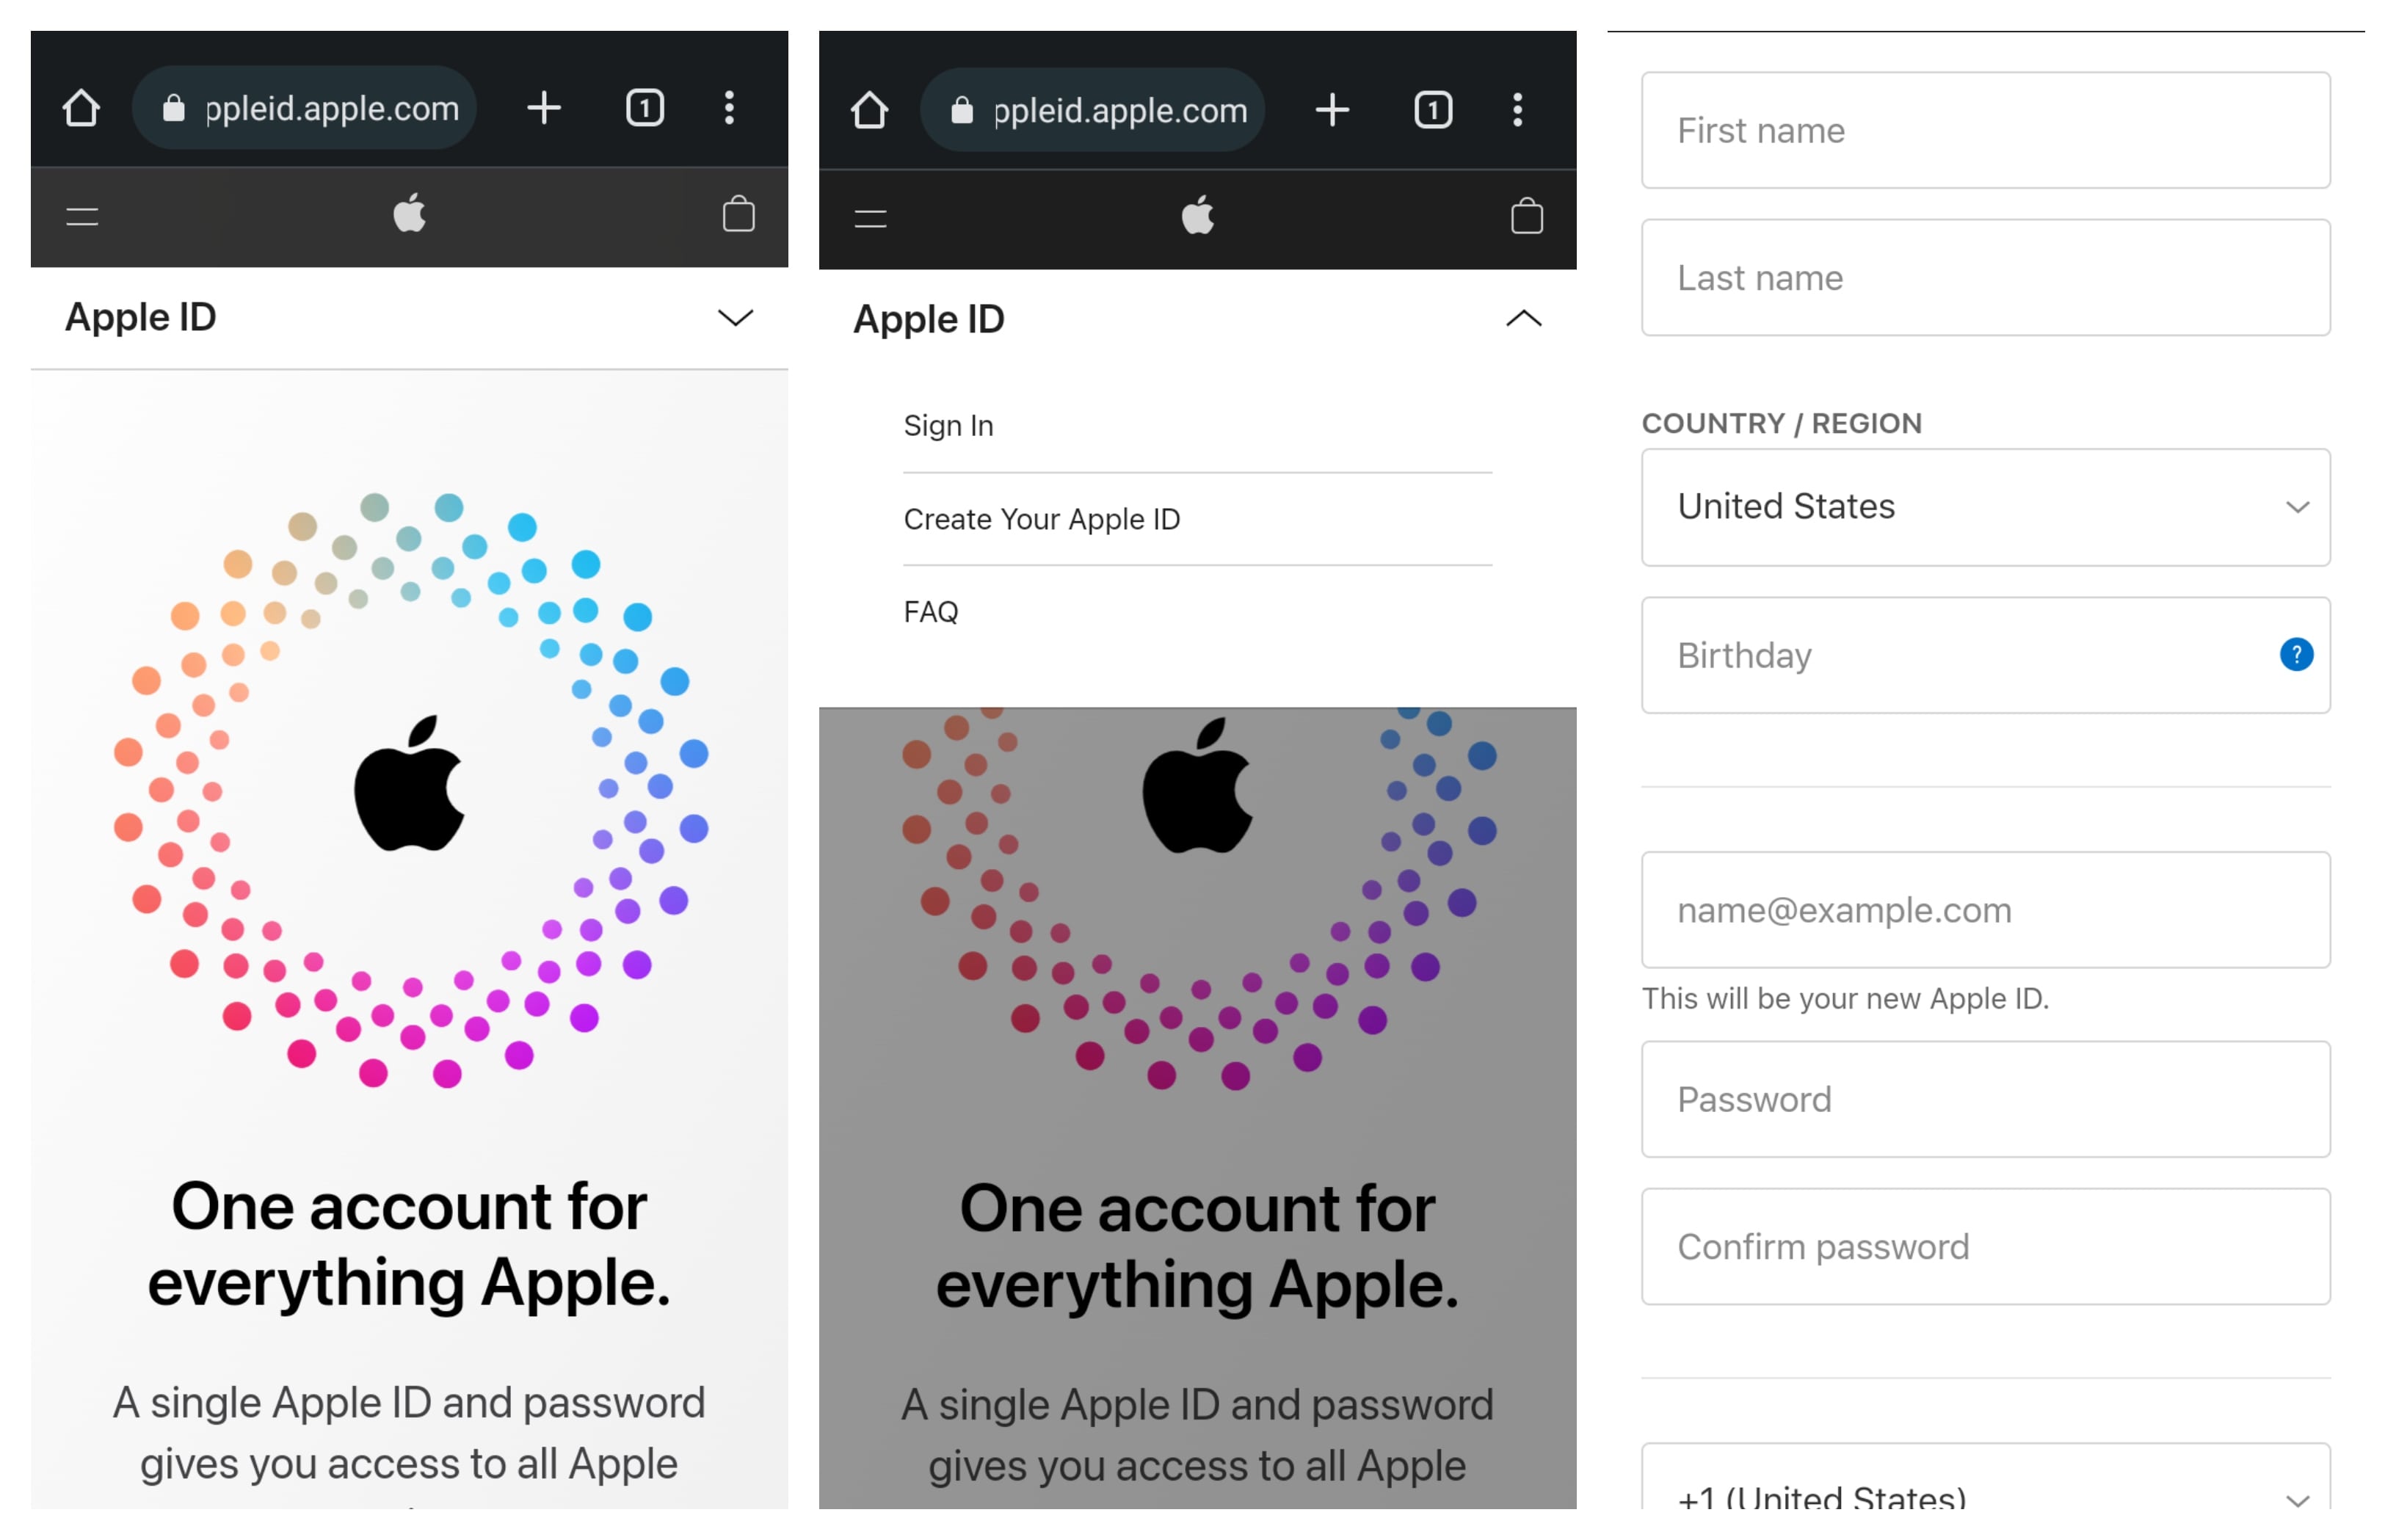 How to Create Apple ID on Android